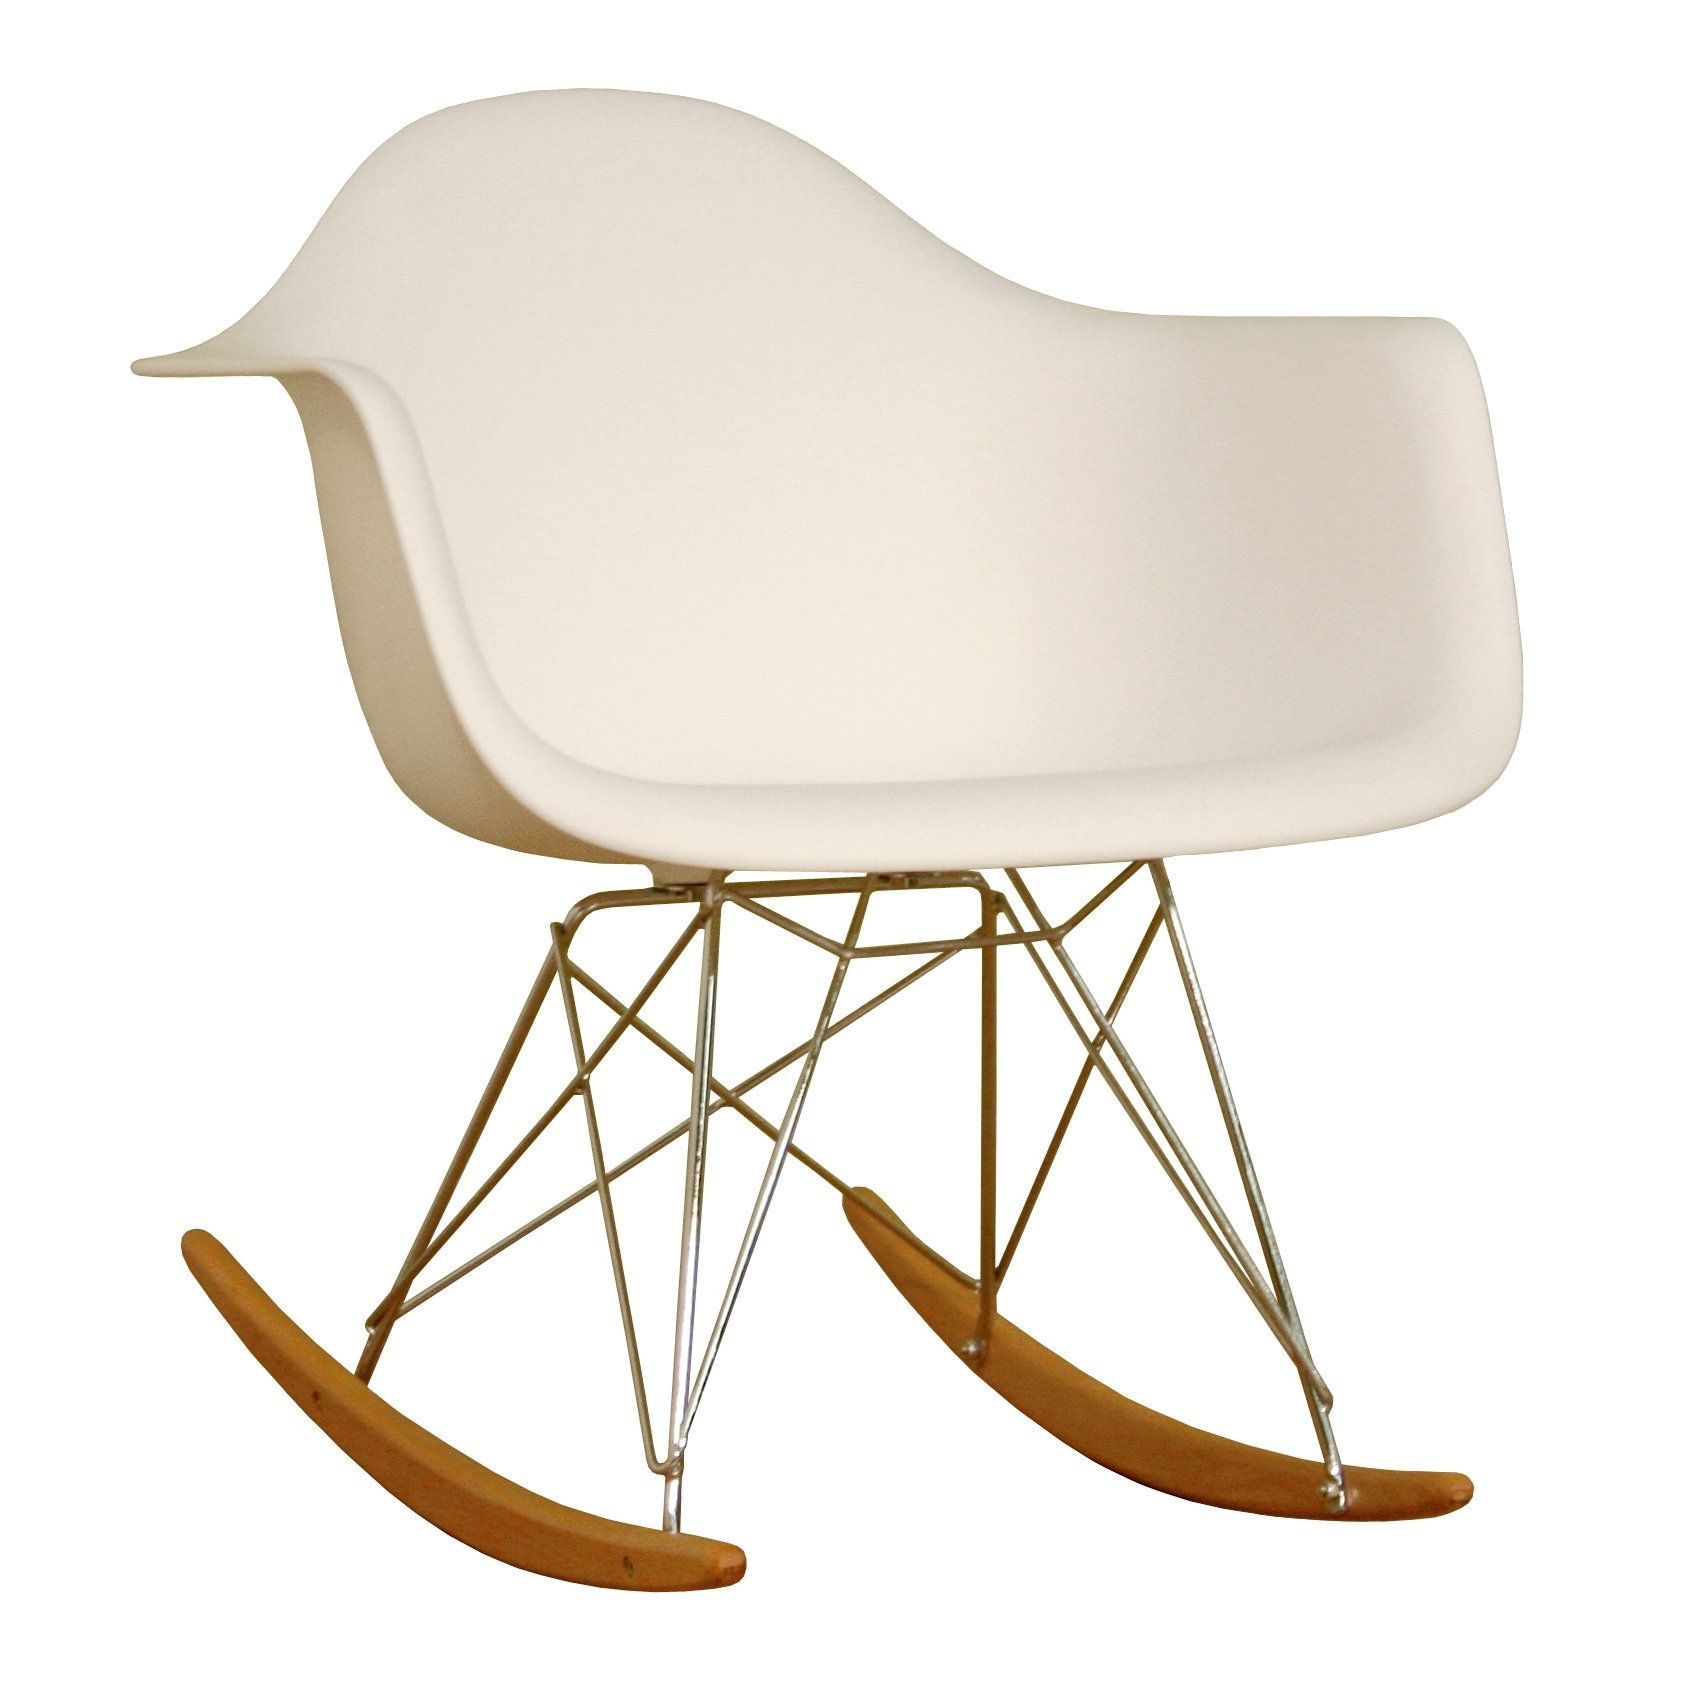 Wholesale Interiors Baxton Studio Mid Century Modern Rocking Chair In Rocking Chairs At Wayfair (View 6 of 15)